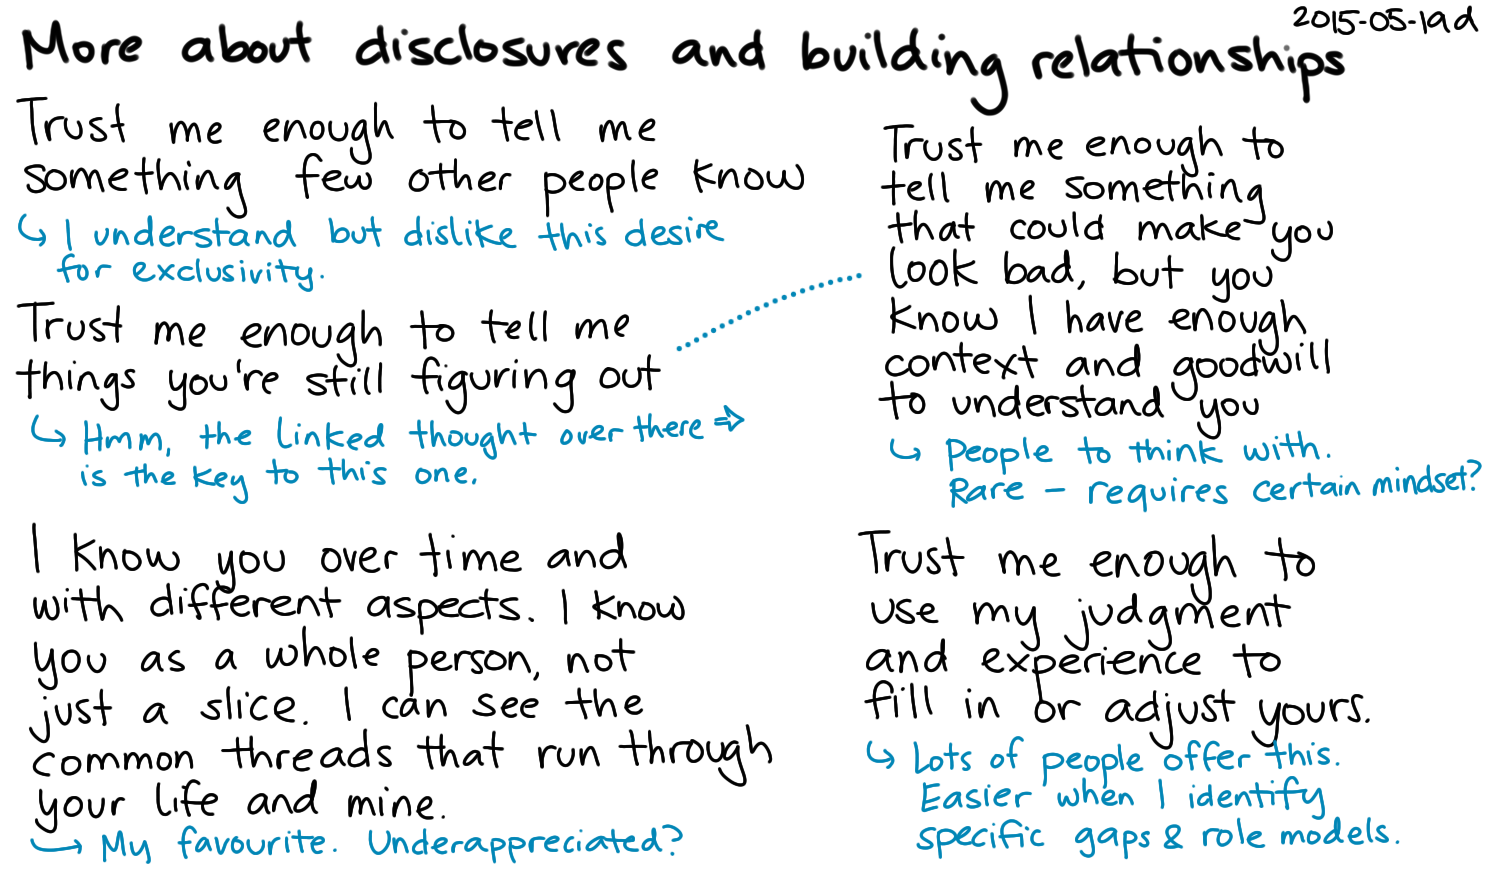 2015-05-19d More about disclosures and building relationships -- index card #disclosure #sharing #reservation.png